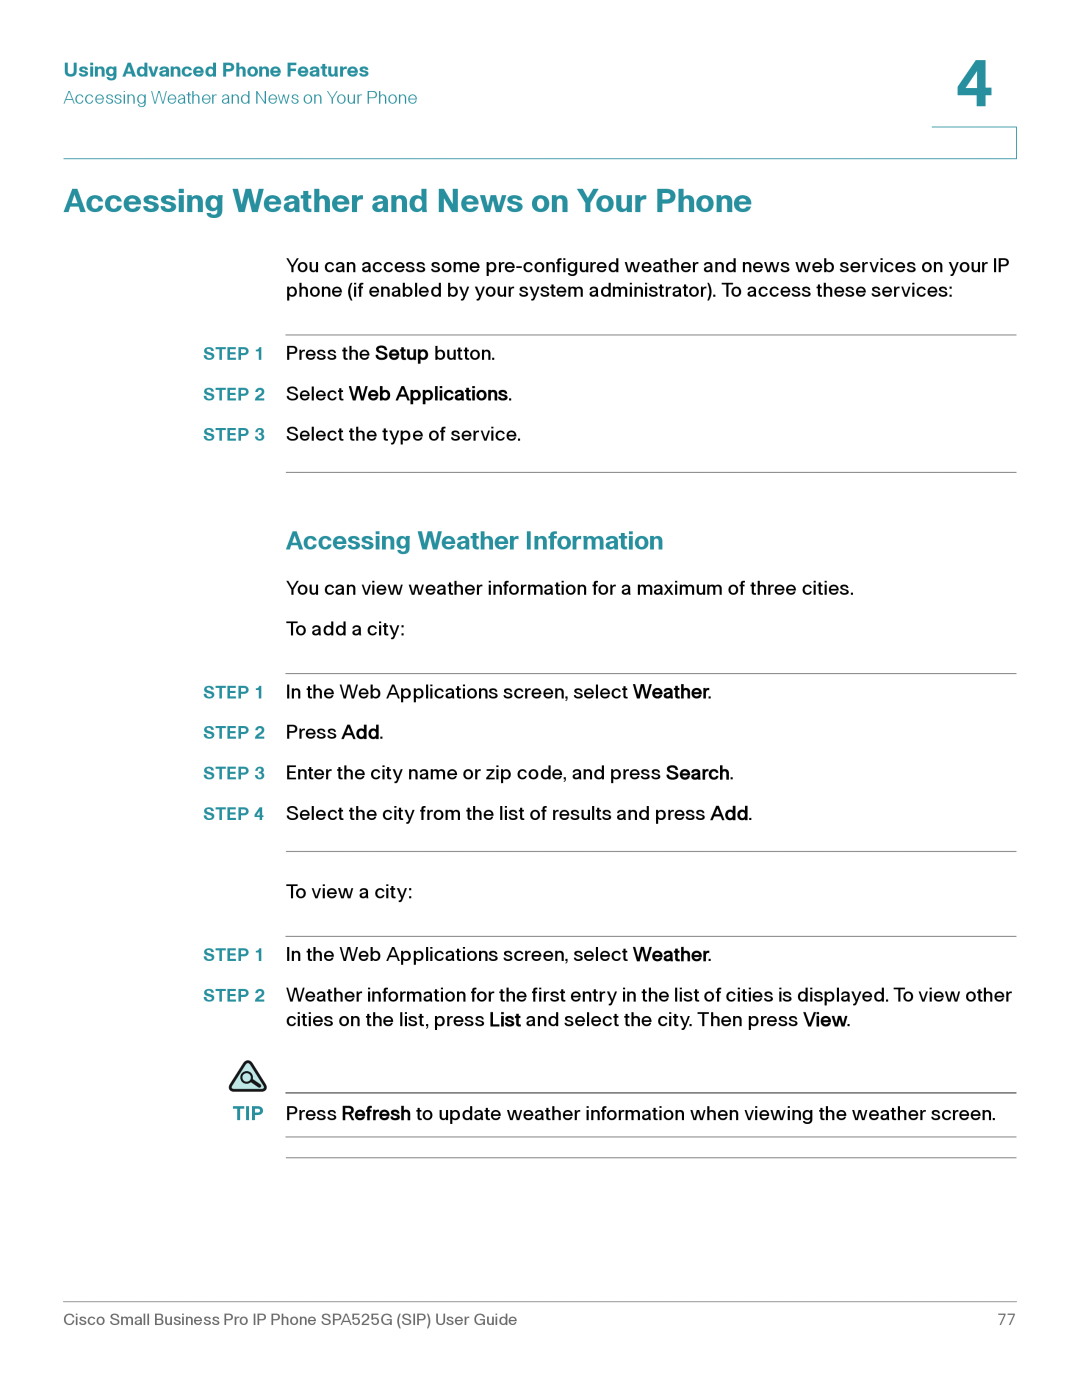 Cisco Systems SPA525G Accessing Weather and News on Your Phone, Accessing Weather Information, Select Web Applications 